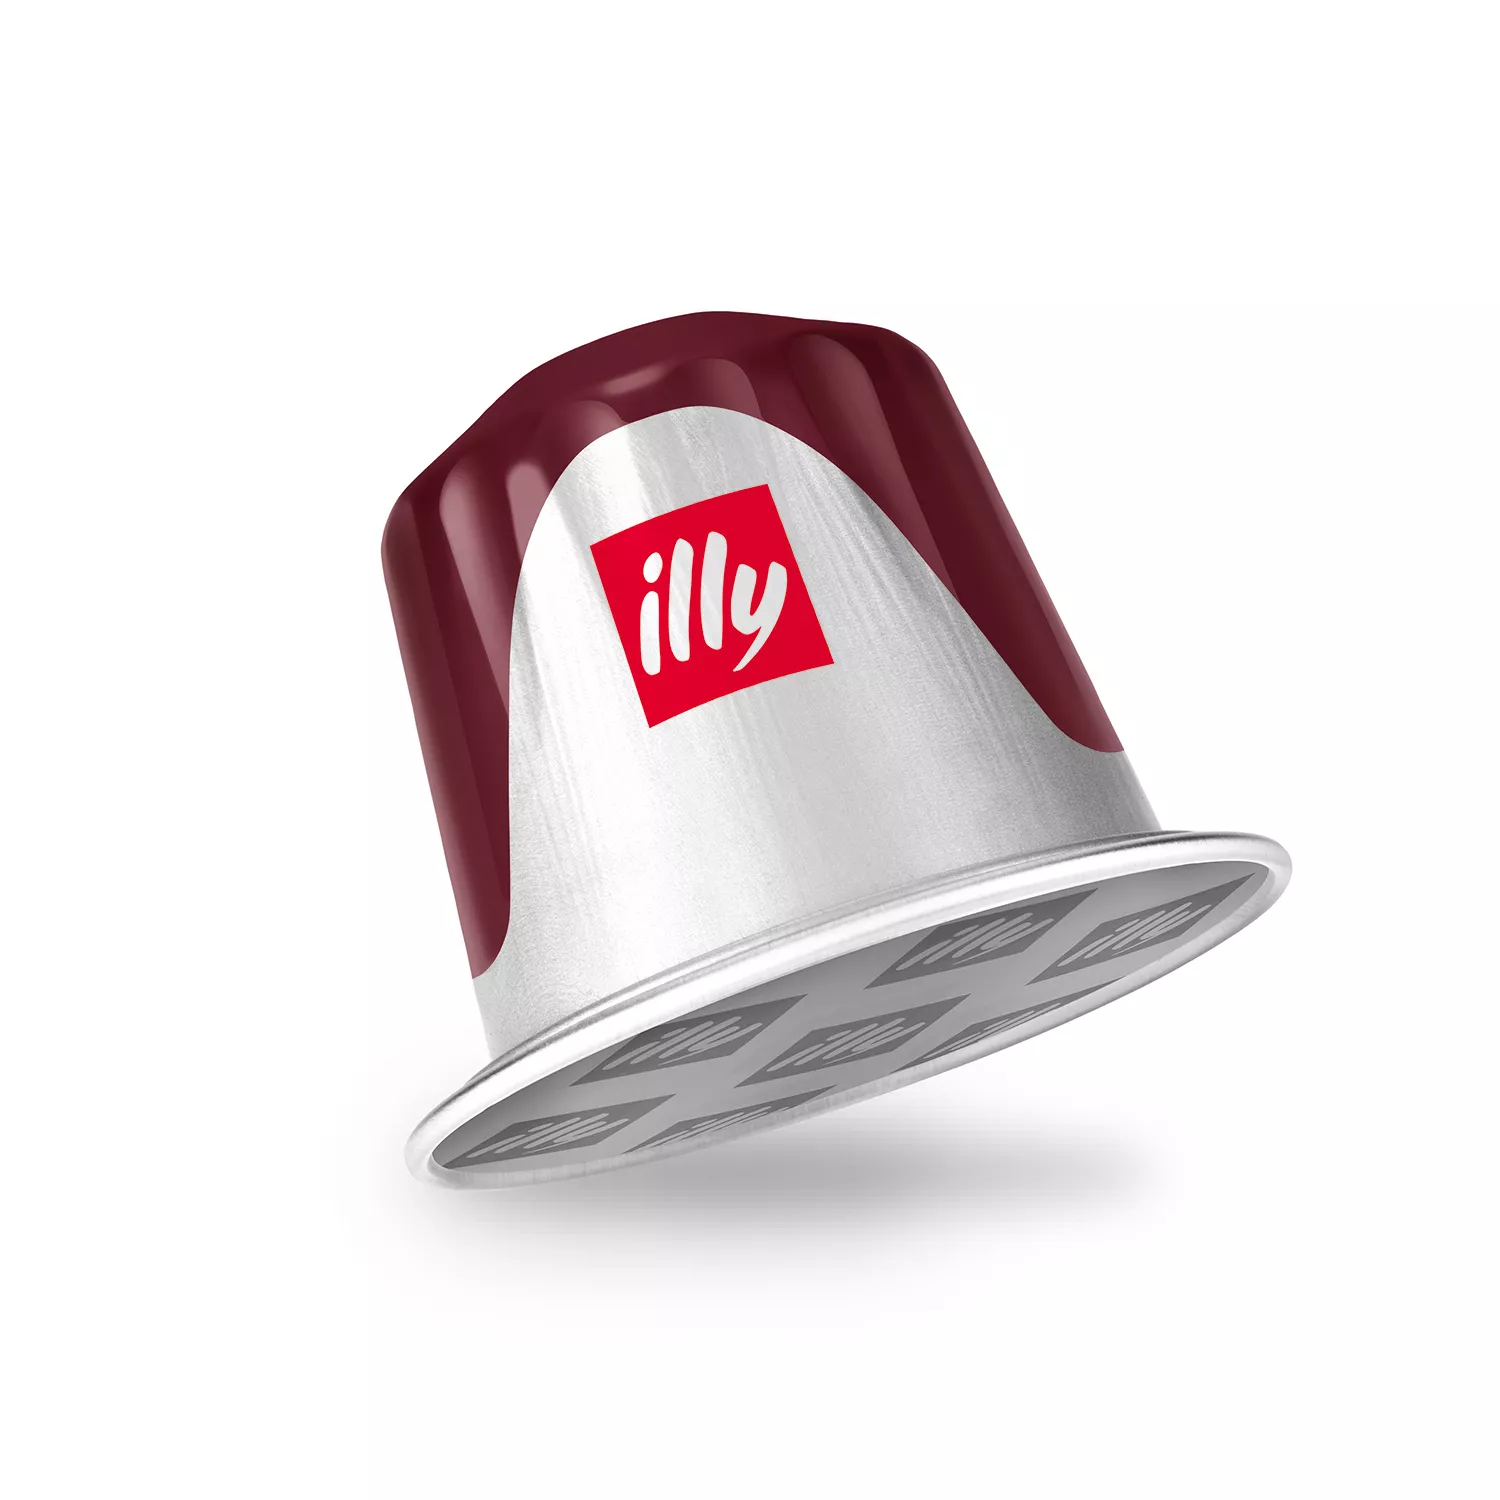 illycaffè launches the new line of illy-brand aluminium compatible capsules